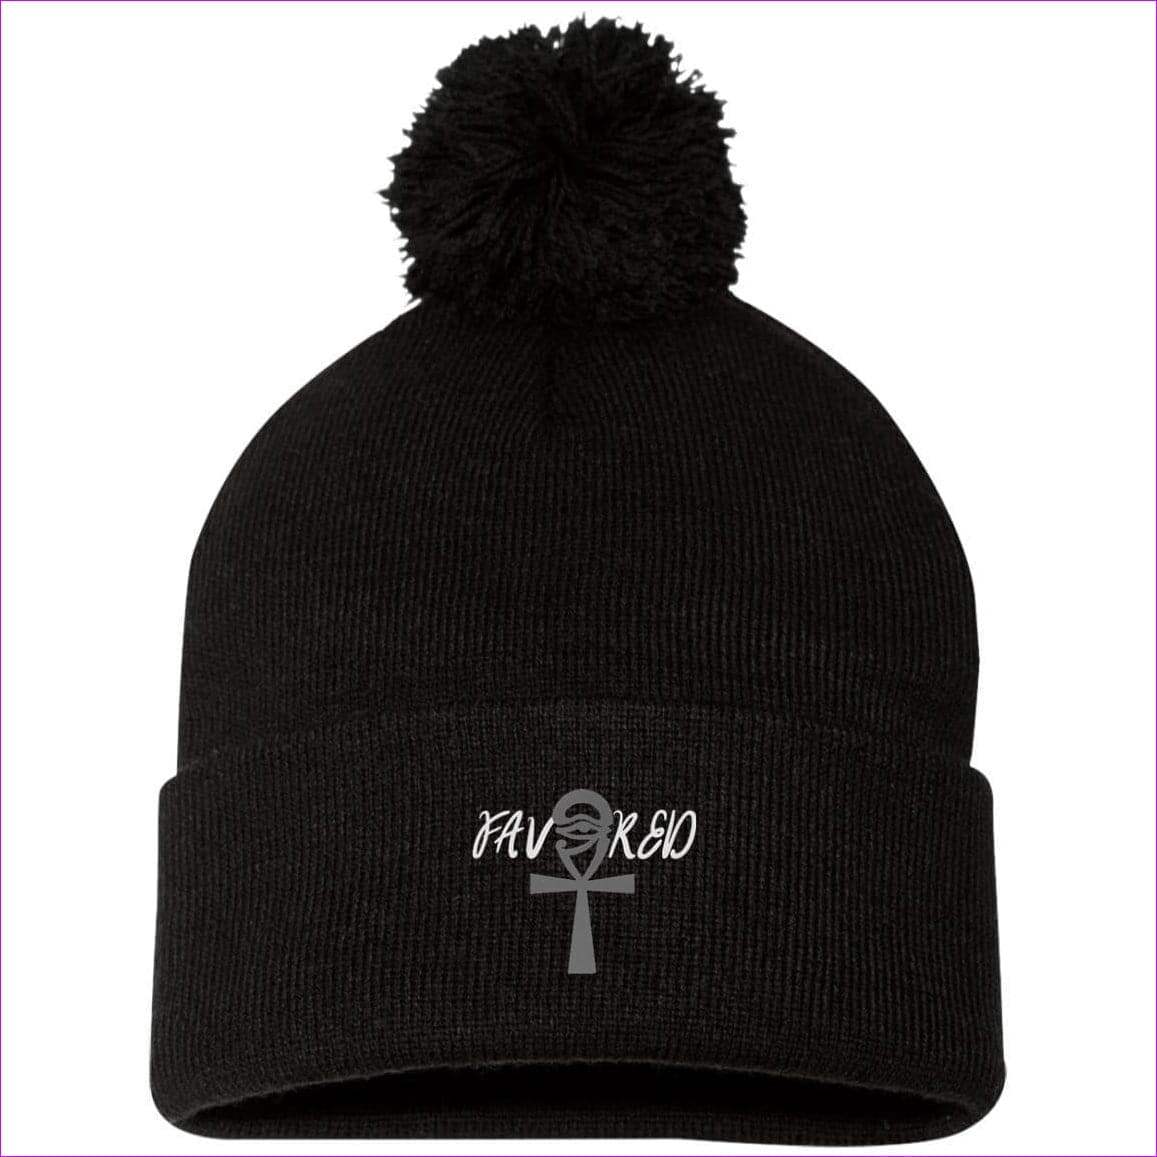 SP15 Pom Pom Knit Cap Black One Size - Favored Embroidered Cap, Knit Cap, Beanie - Beanie at TFC&H Co.